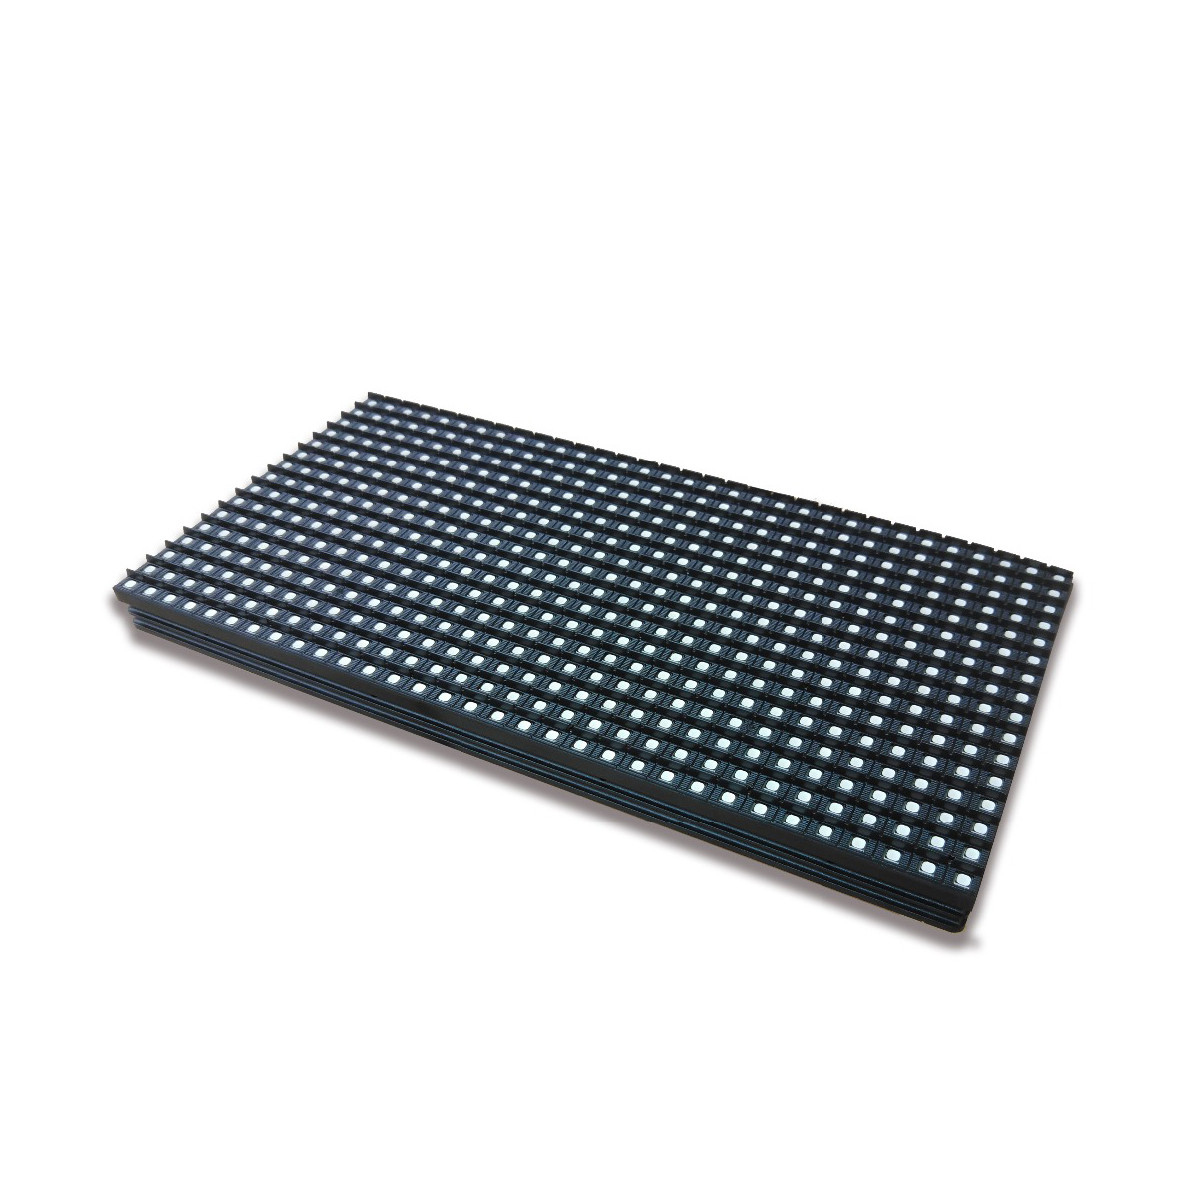 P10 Outdoor SMD LED Display Module 320*160mm SMD1921 5000cd/㎡ Brightness 1920Hz High Refresh